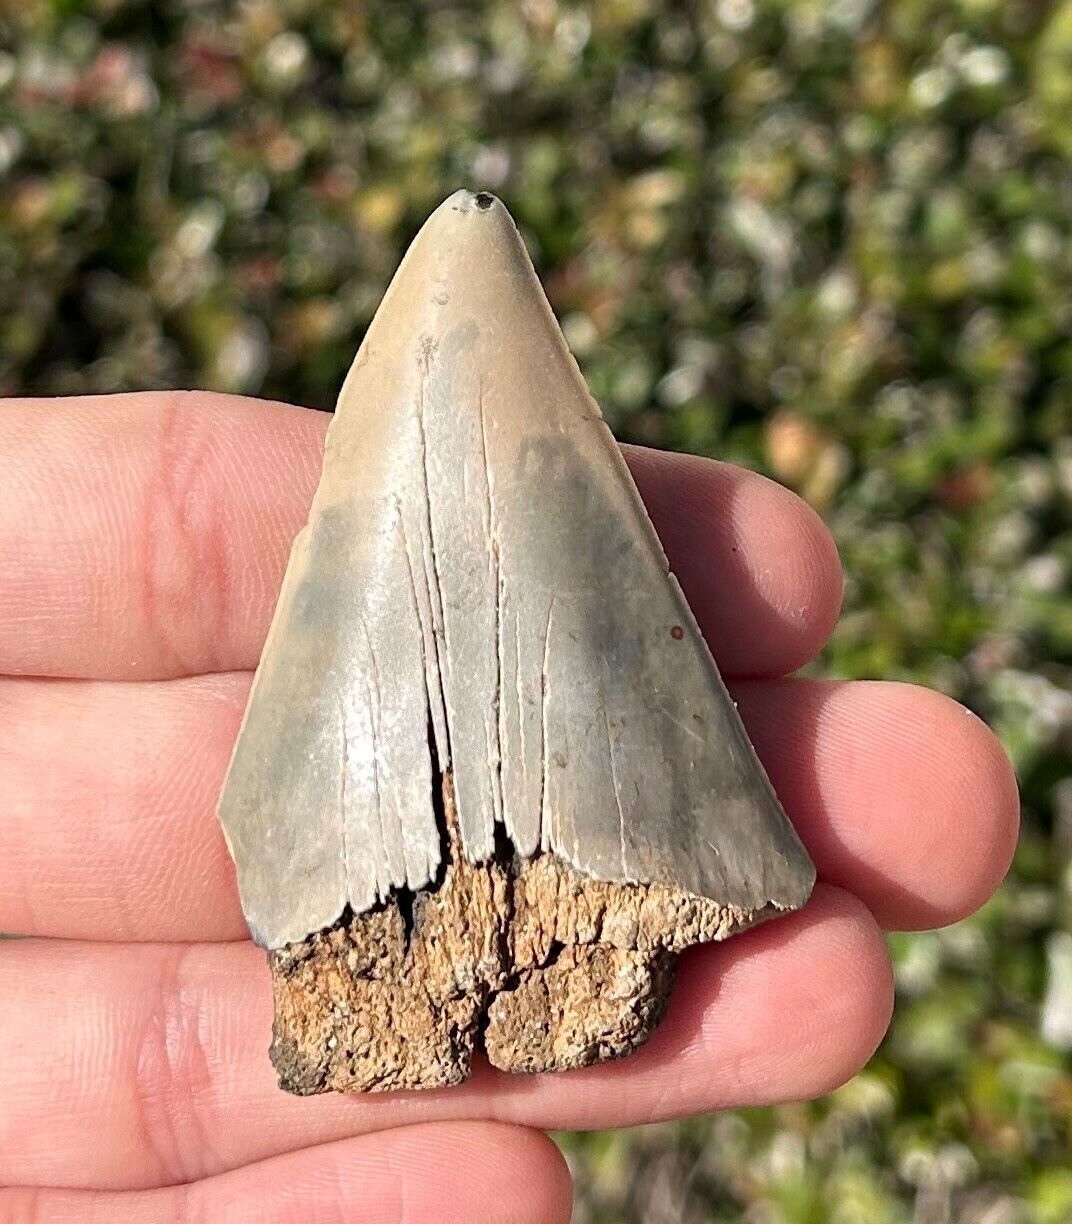 BIG Belgium Fossil Sharks Tooth 2.35” Carcharodon hastalis Great White Ancestor